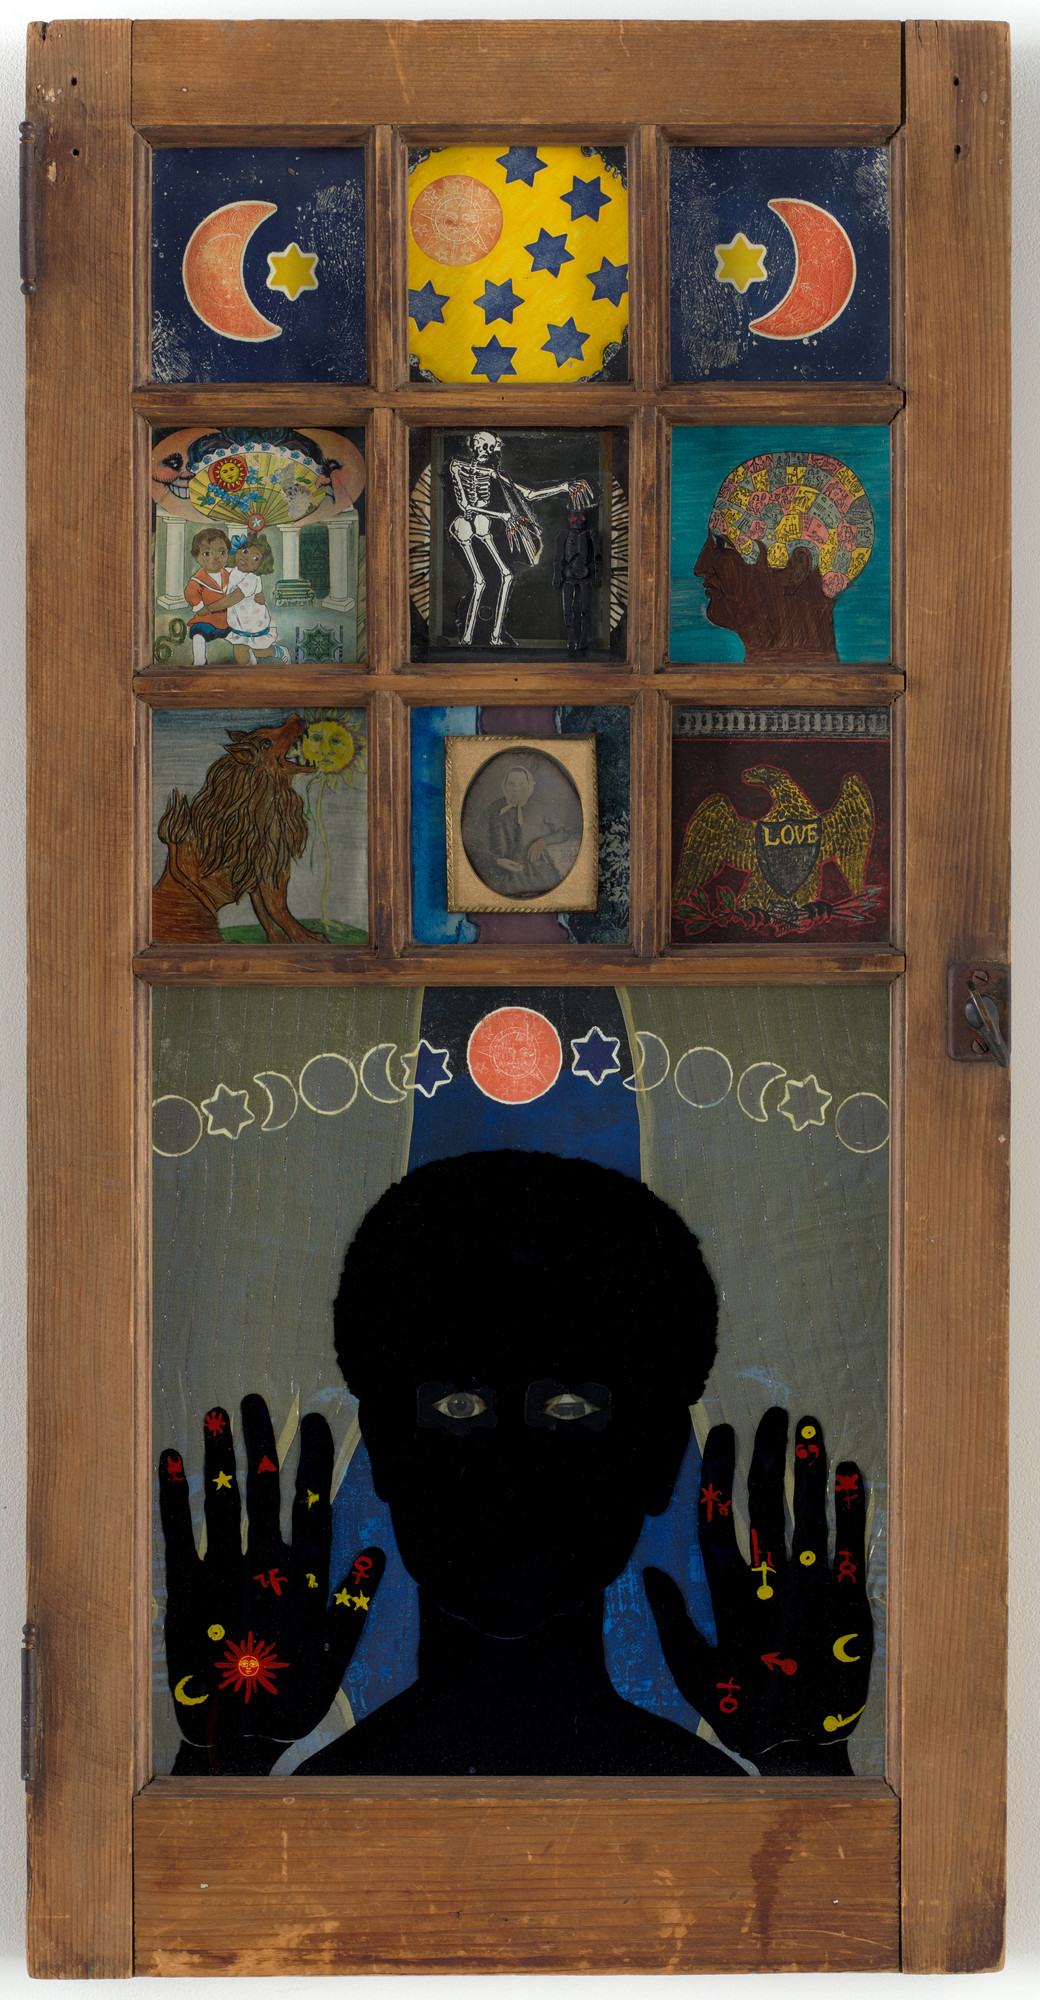 Betye Saar. Black Girl’s Window, 1969. Wooden window frame with paint, cut-and-pasted printed and painted papers, daguerreotype, lenticular print, and plastic figurine. 35 3/4 x 18 x 1 1/2" (90.8 x 45.7 x 3.8 cm). Gift of Candace King Weir through The Modern Women's Fund, and Committee on Painting and Sculpture Funds